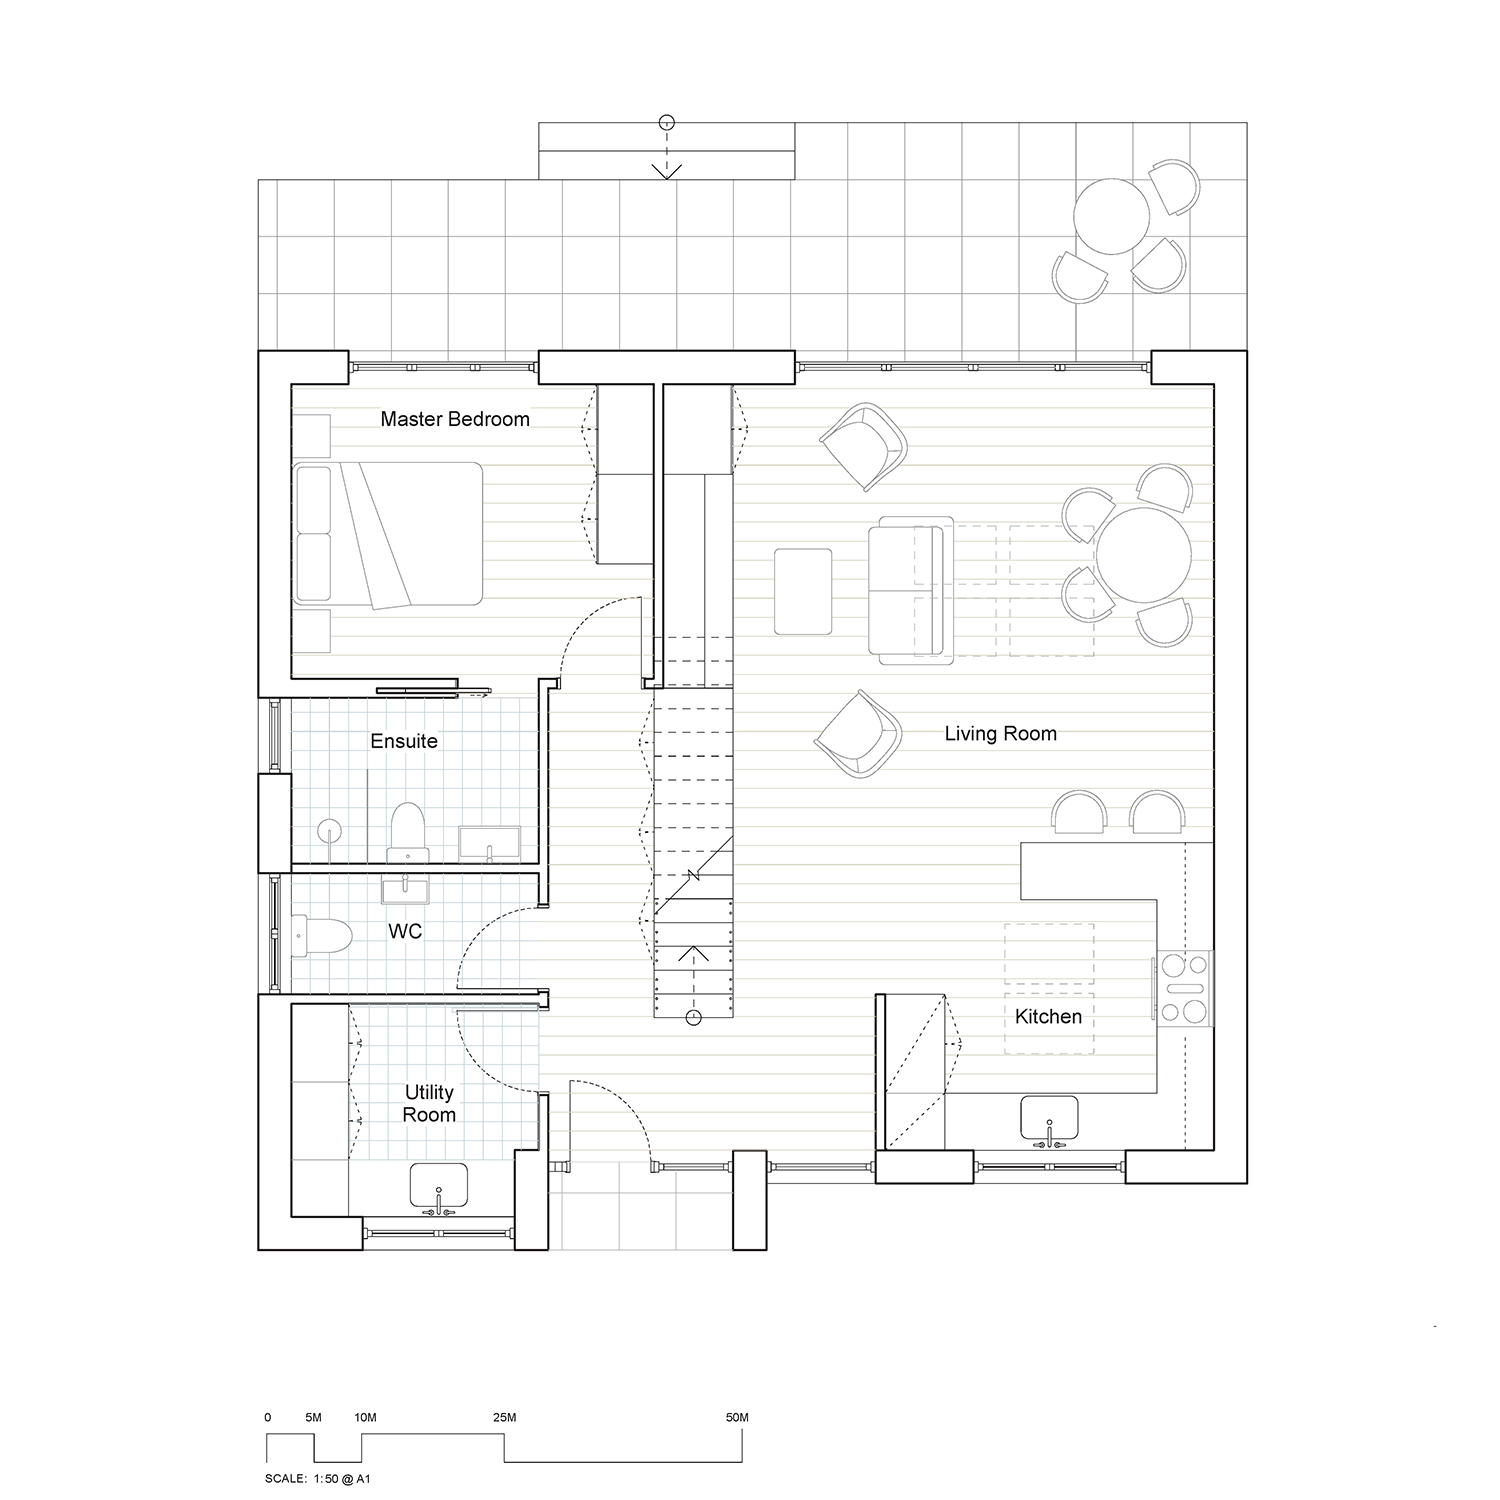 Plan showing Revit Template drawing in white